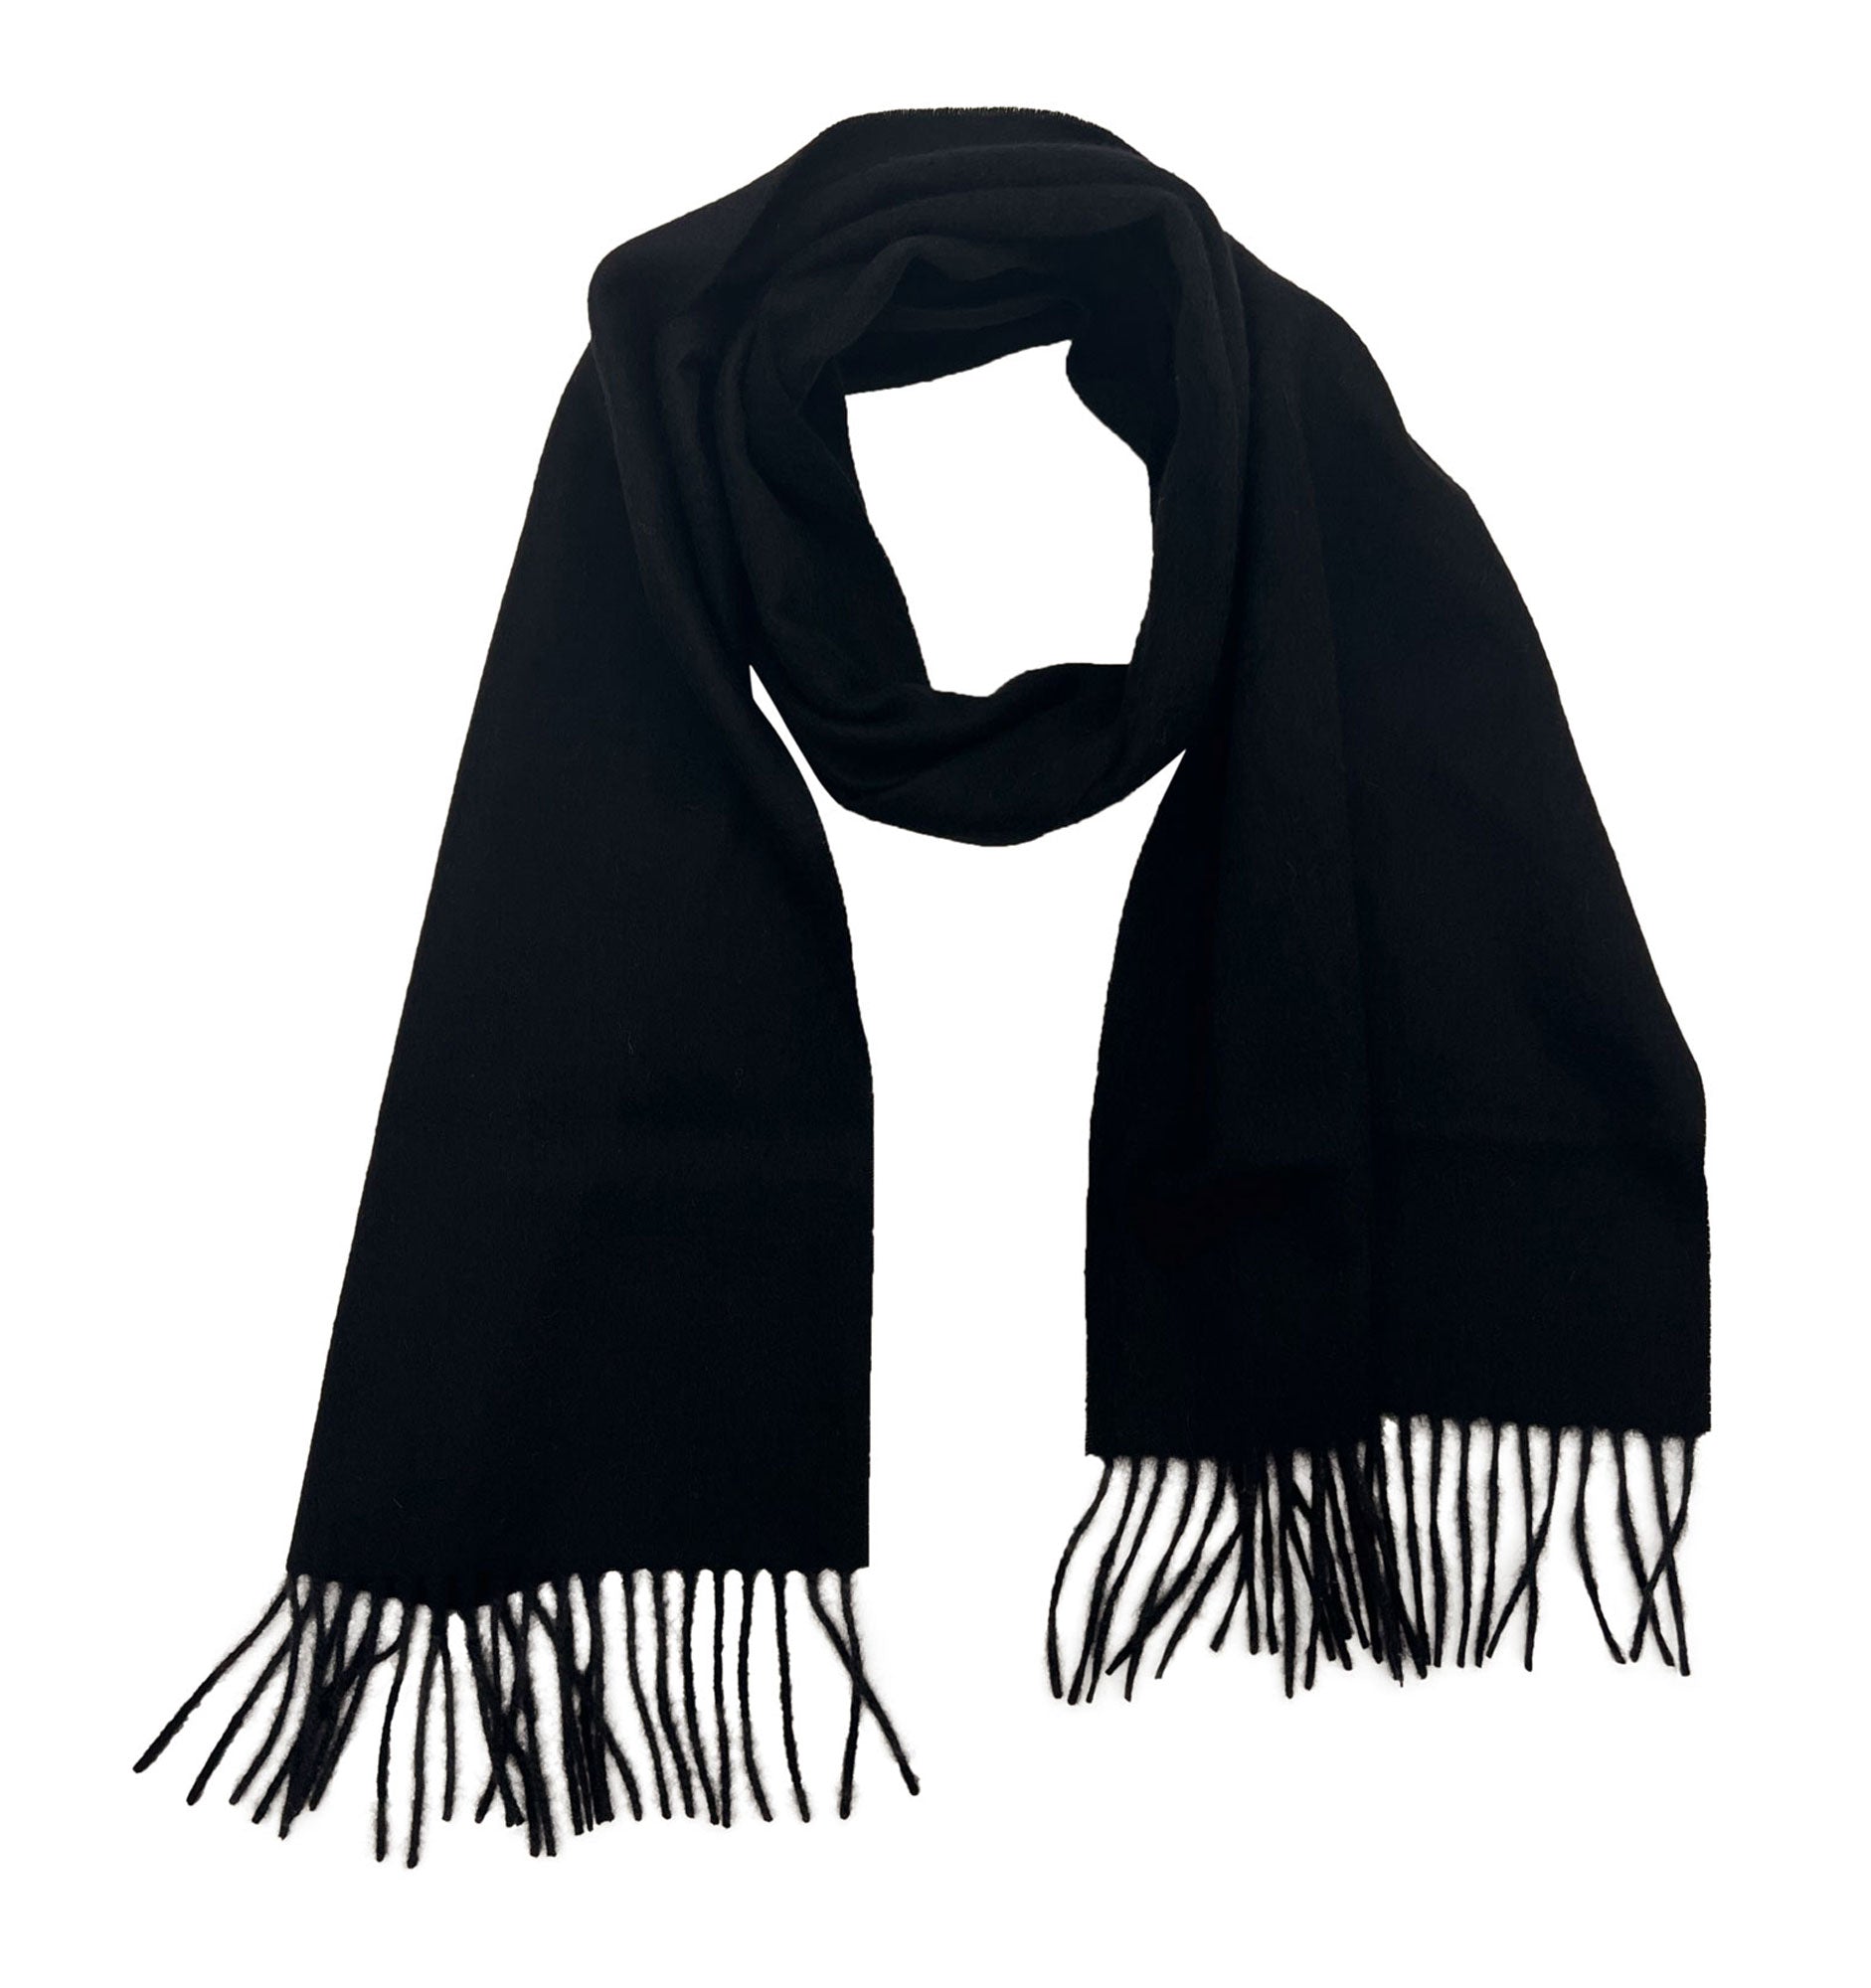 Looped black cashmere scarf with both ends parallel and tassles extended.